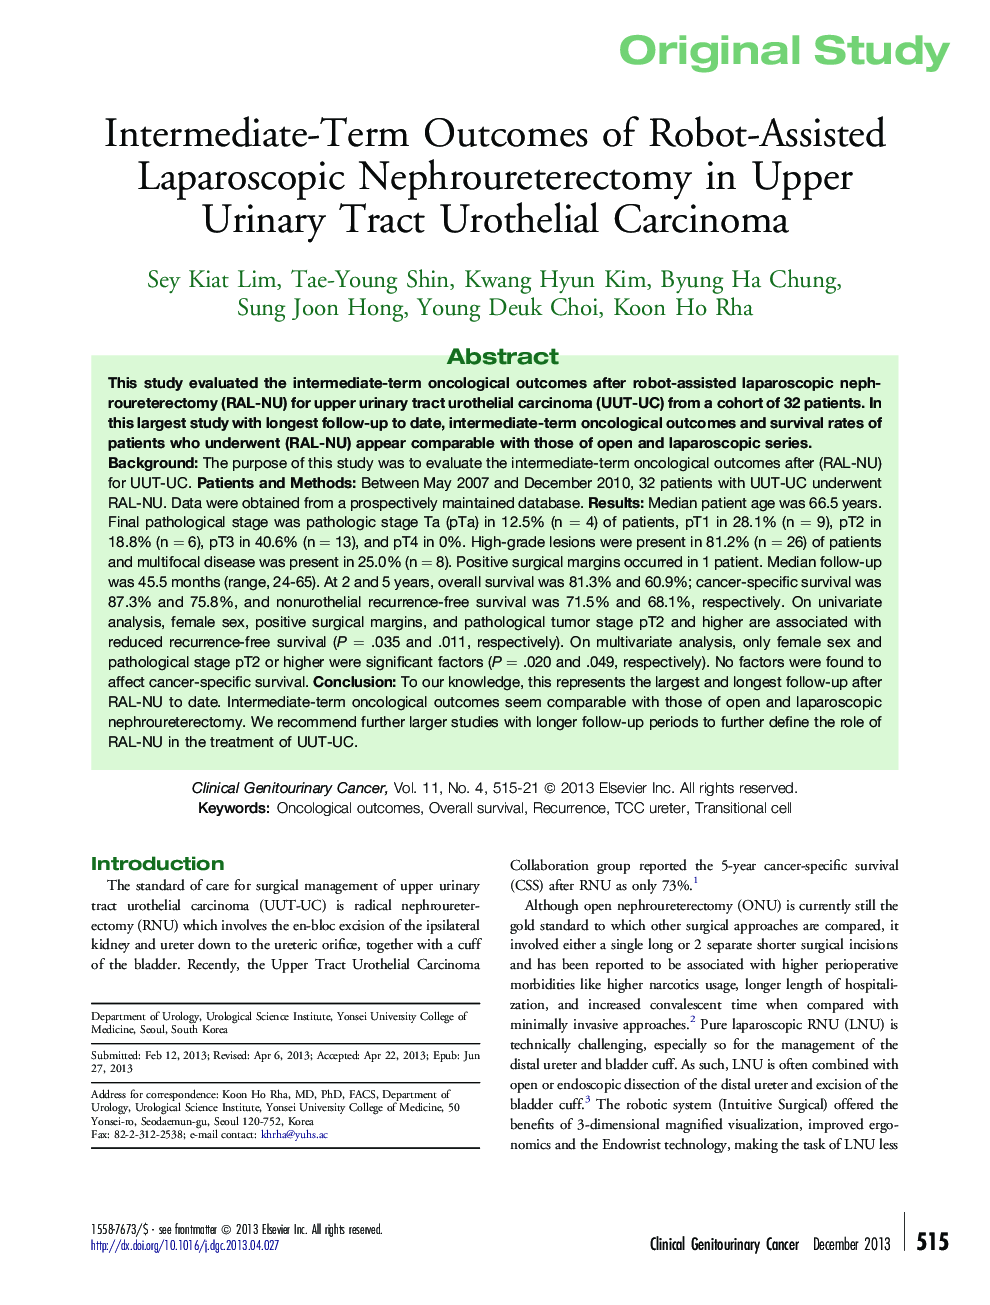 Intermediate-Term Outcomes of Robot-Assisted Laparoscopic Nephroureterectomy in Upper Urinary Tract Urothelial Carcinoma